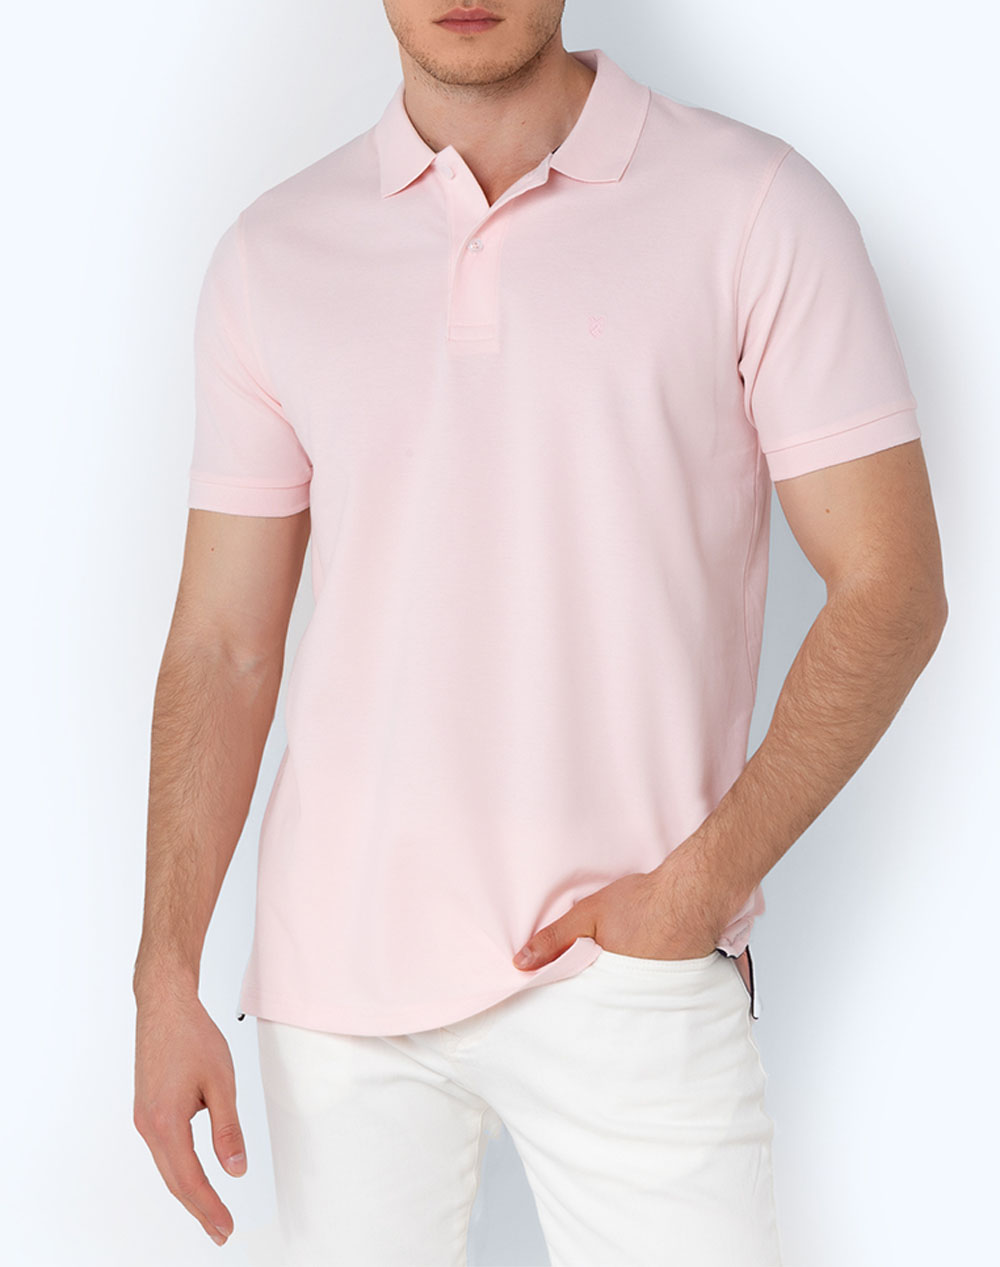 THE BOSTONIANS ΜΠΛΟΥΖΑ POLO PIQUE REGULAR FIT 3PS0001-PINK Pink